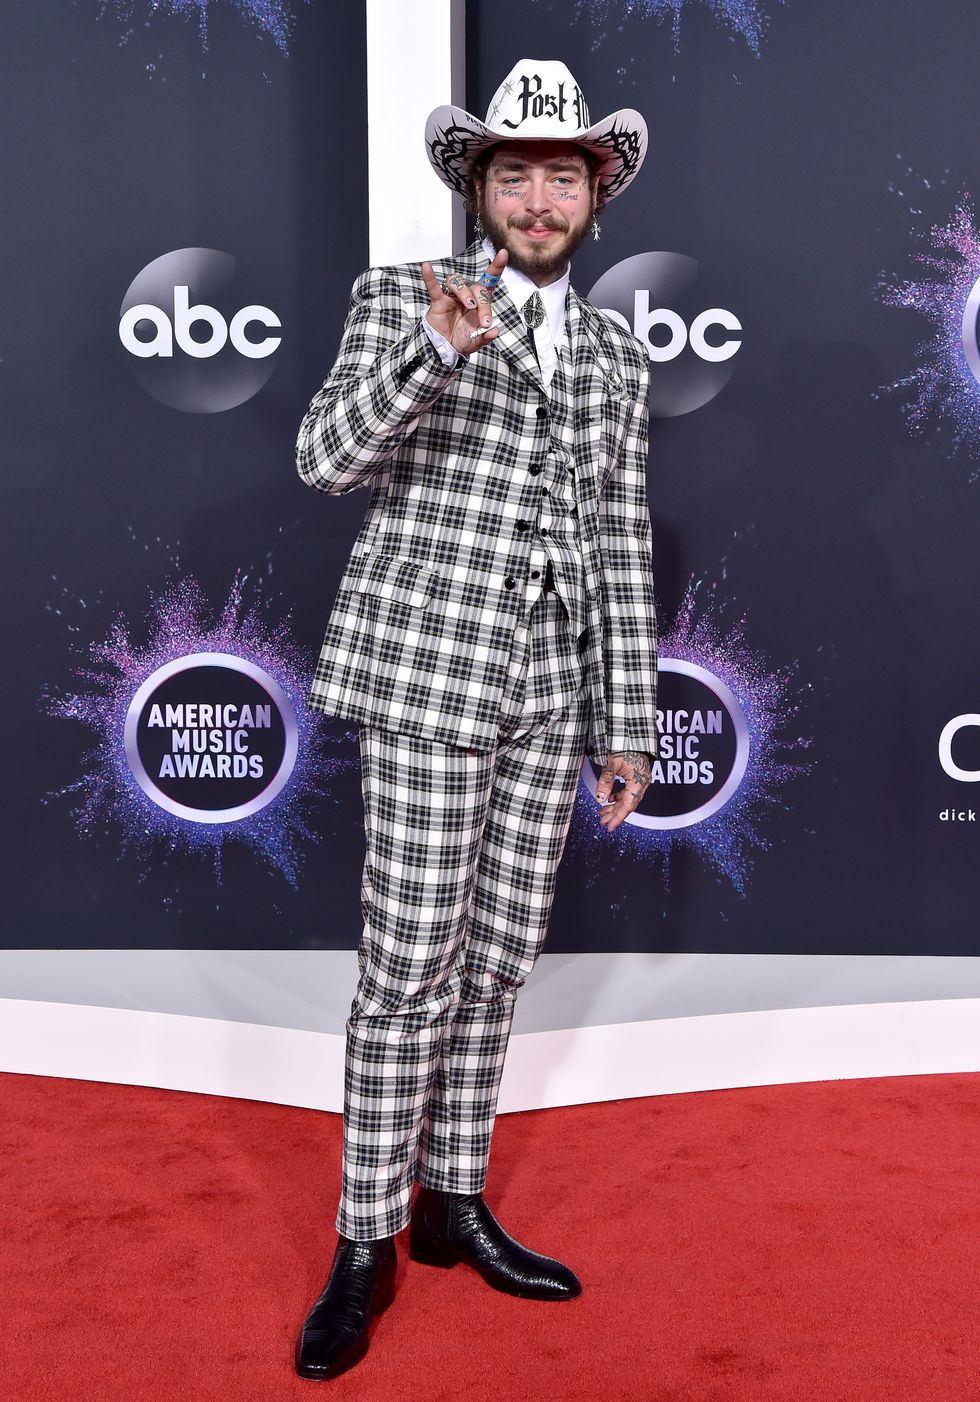 Post Malone at the 2019 American Music Awards - Arrivals